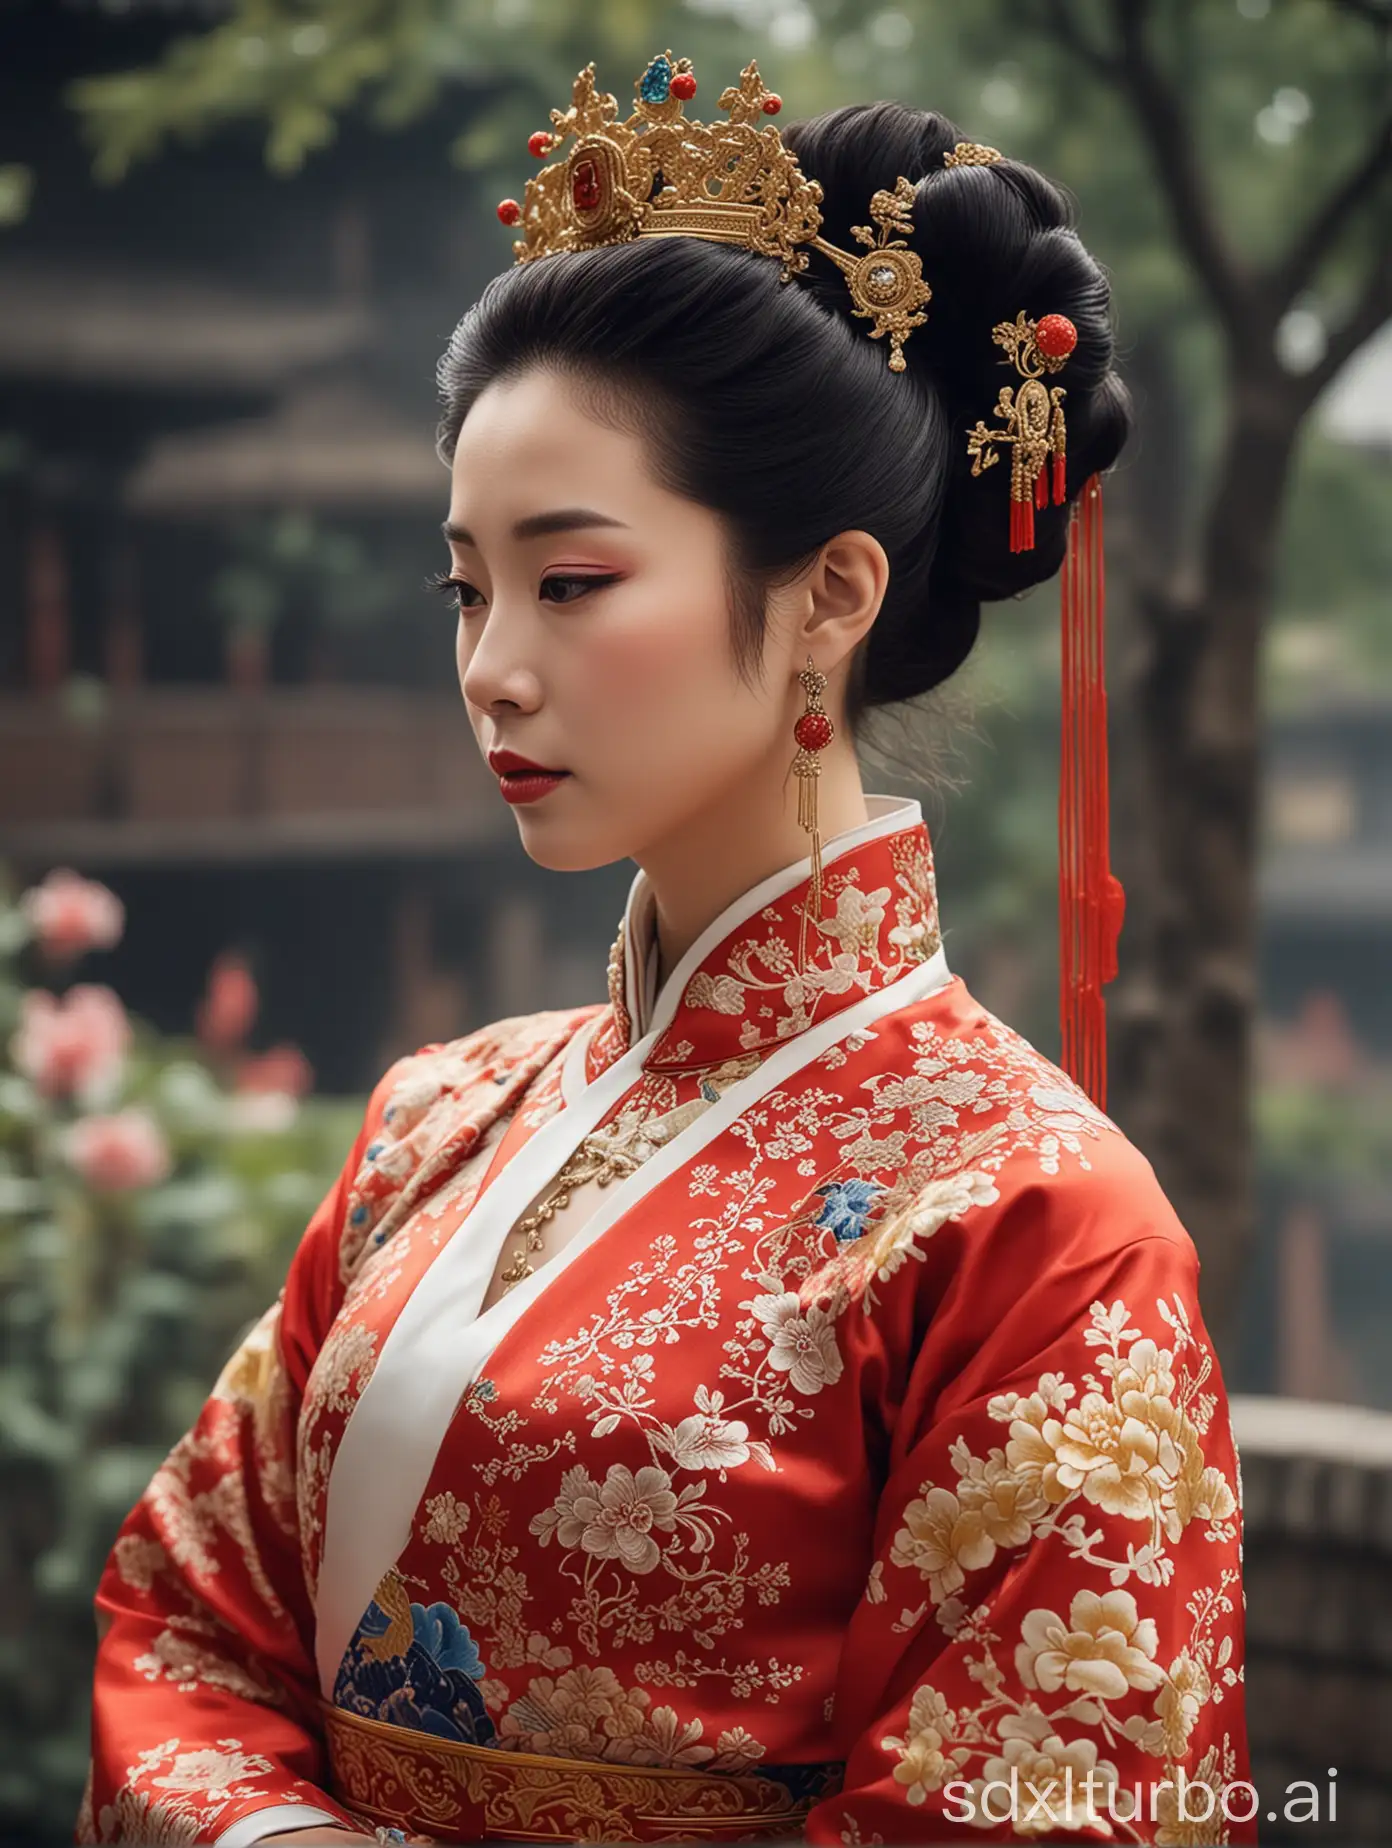 Majestic-Queen-in-Traditional-Chinese-Dress-with-Elaborate-Hairstyle